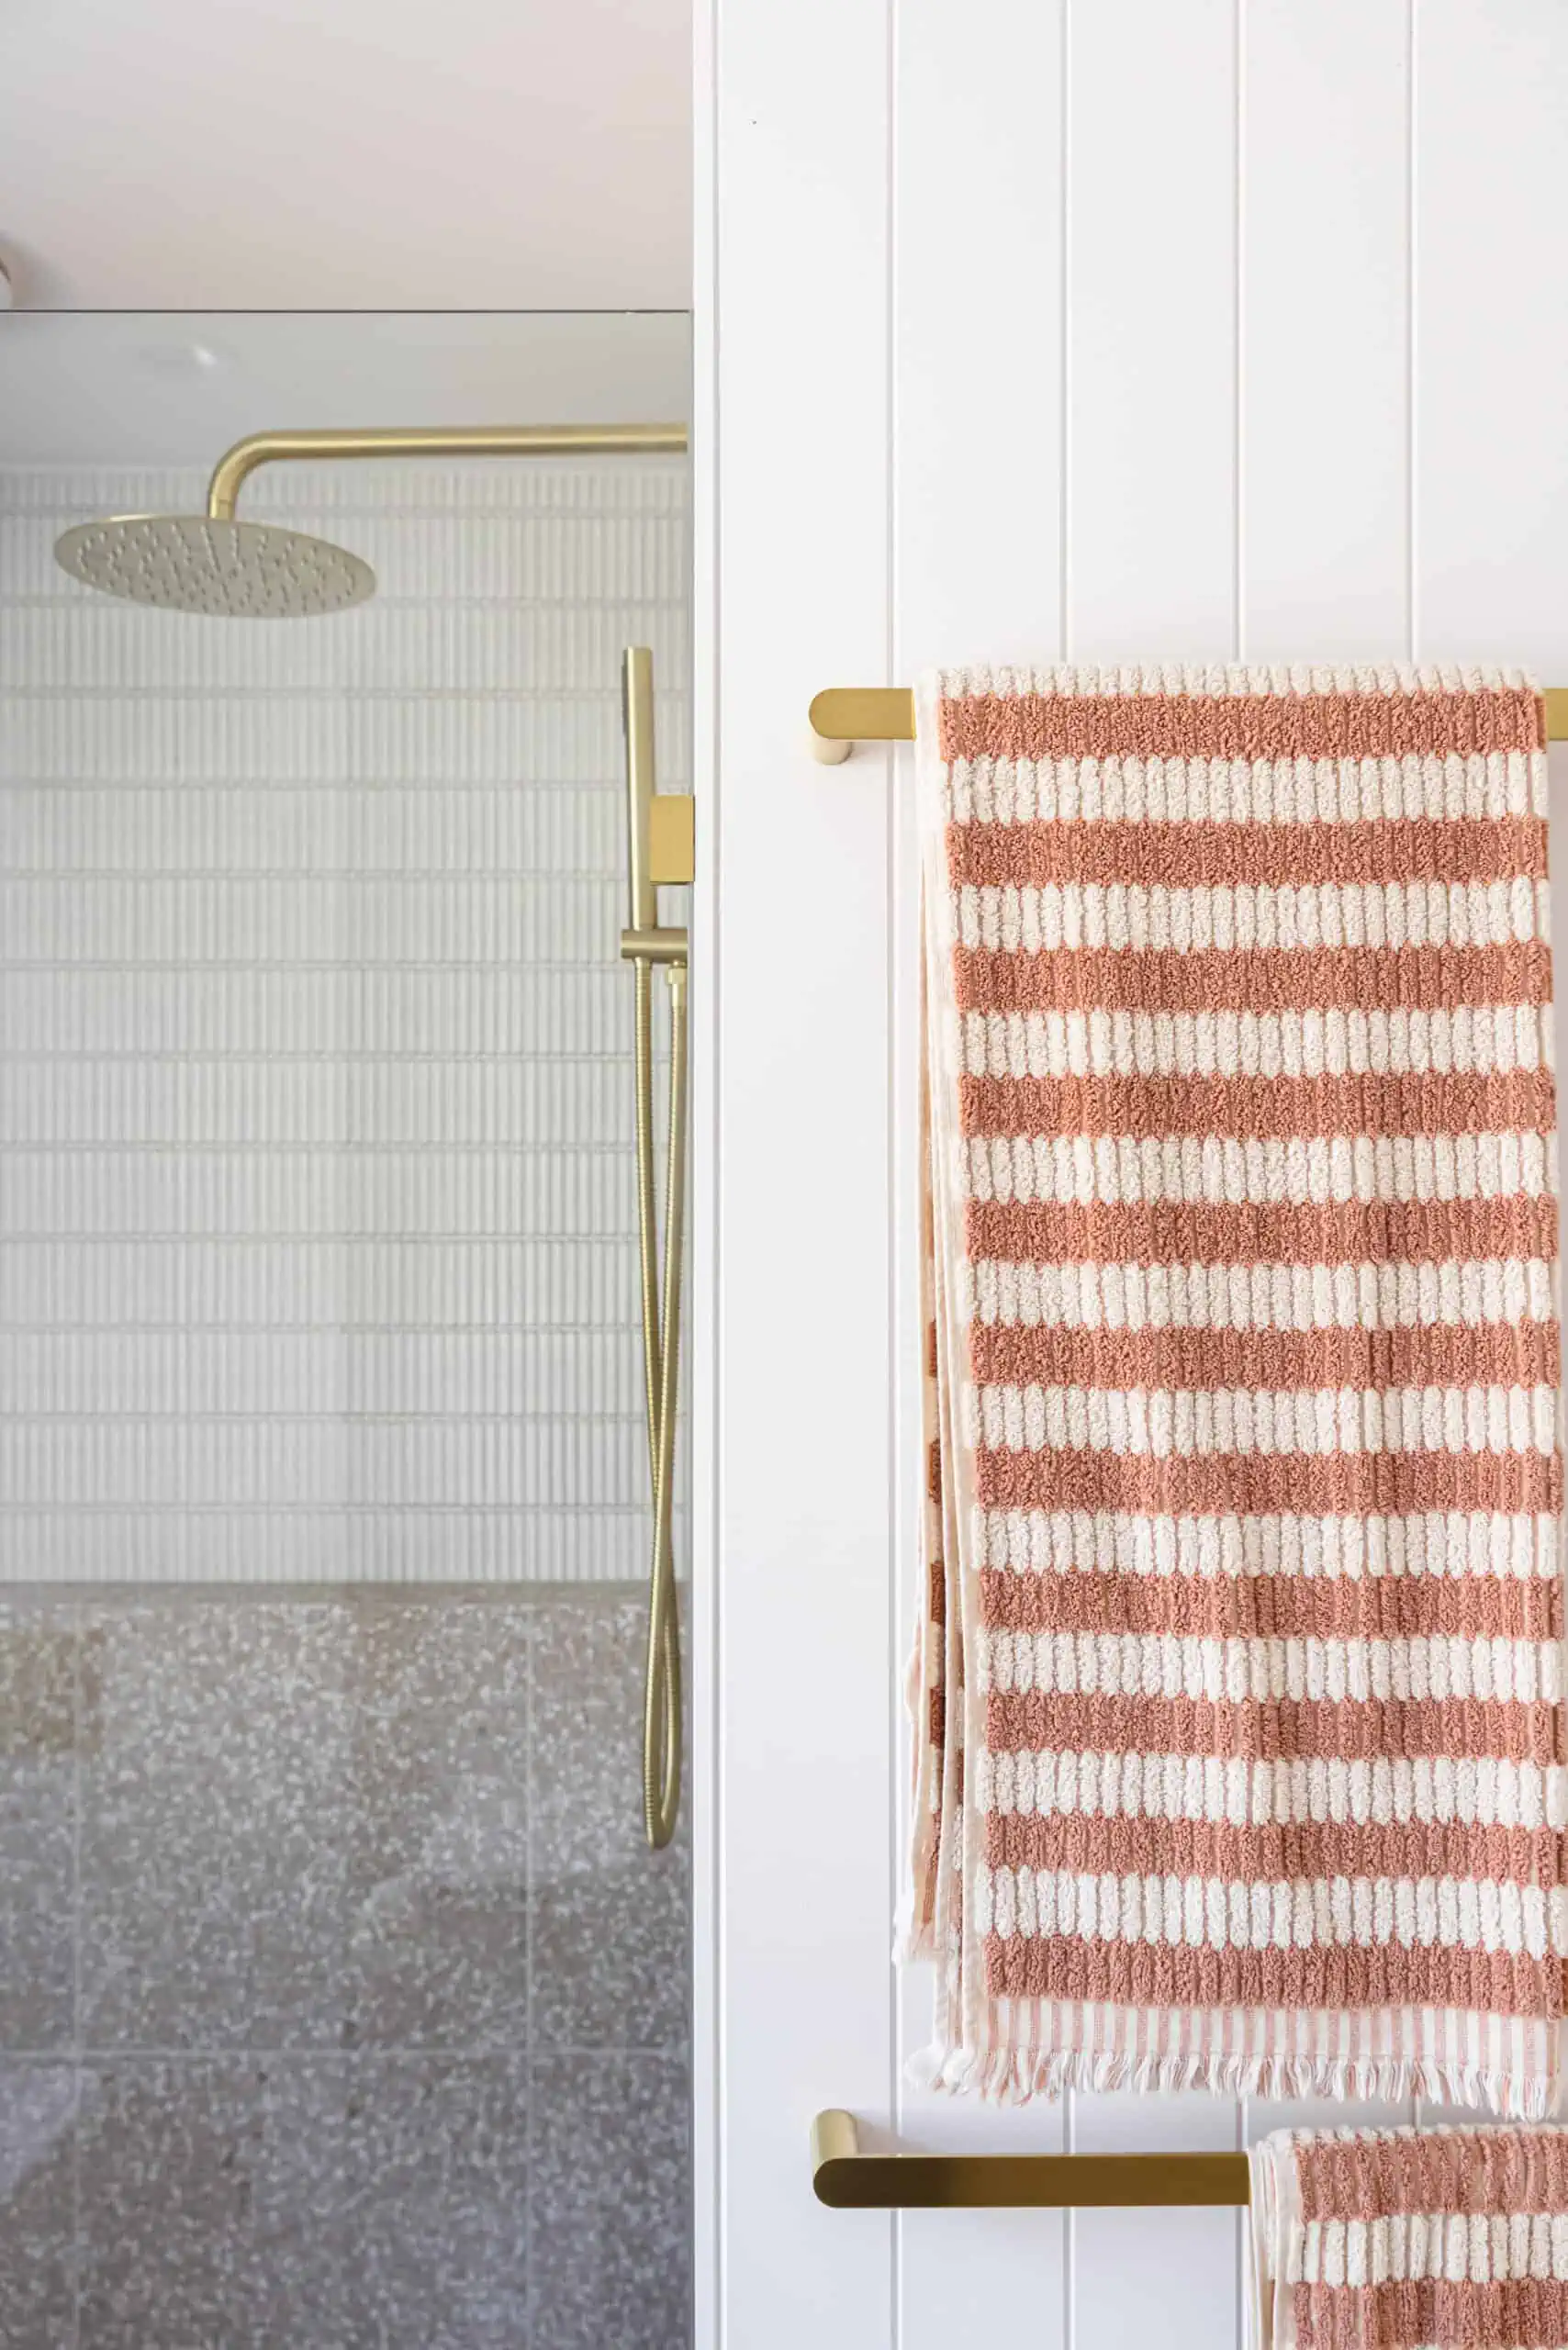 Bathroom renovation after shot showing a shower with gold accessories and a striped towel.